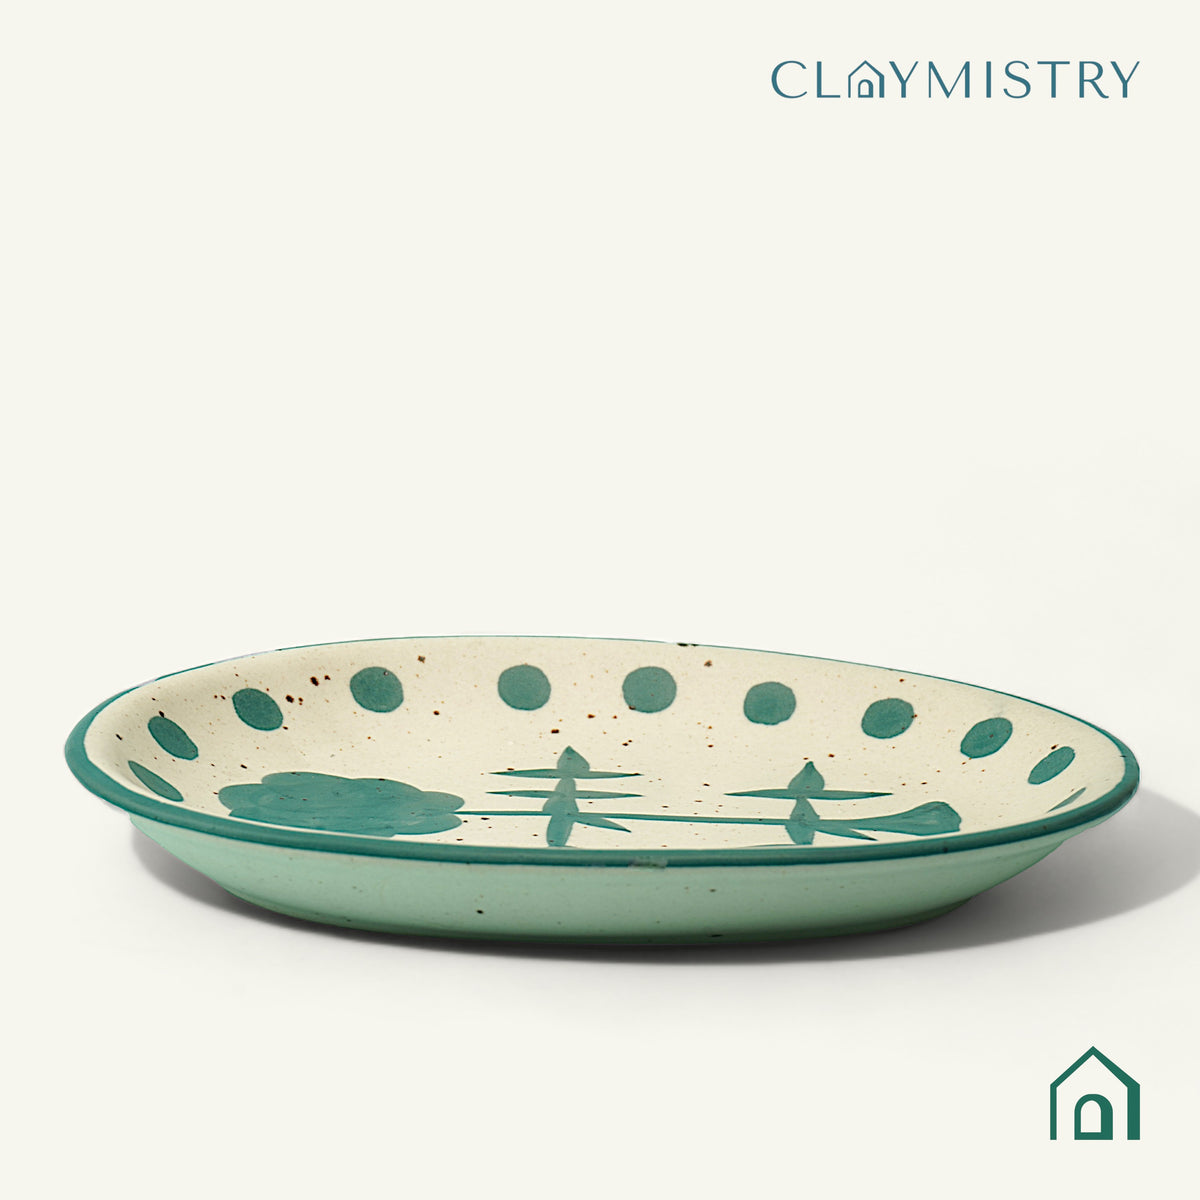 Claymistry Ceramic Snacks White with Green Flowers Round Serving Tray | 26cm * 21cm * 3cm | Matte Finish | Dishwasher, Oven & Microwave Safe | Biscuit, Namkeen, Chips, Tray | Premium Kitchen Crockery